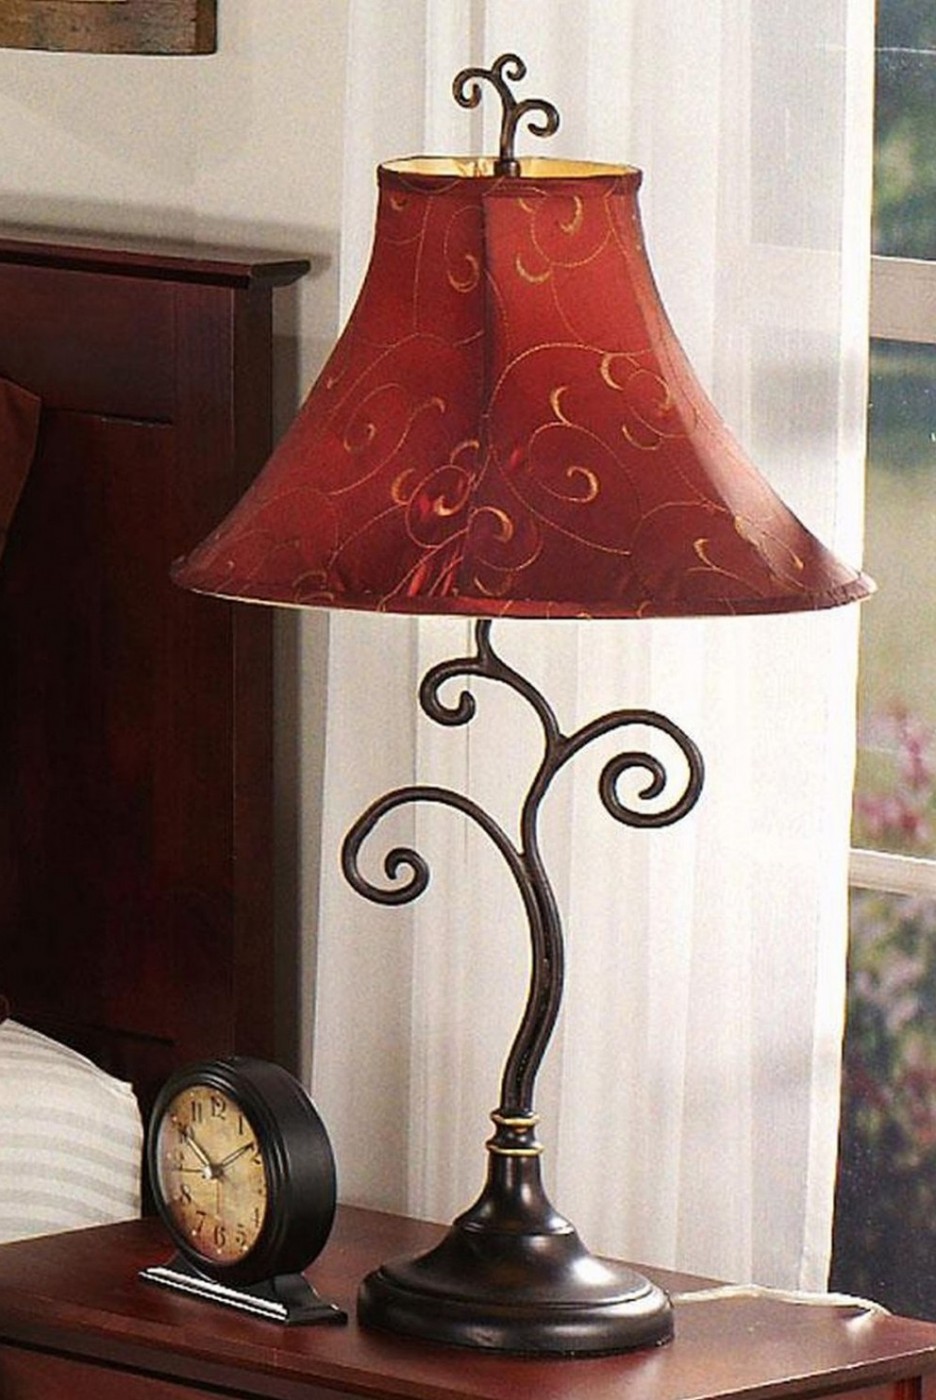 living room traditional table lamp design idea for red pattern accent shade black metal part scrool decoration bedroom end decor wedding gifts decorative lamps resin wicker tucker